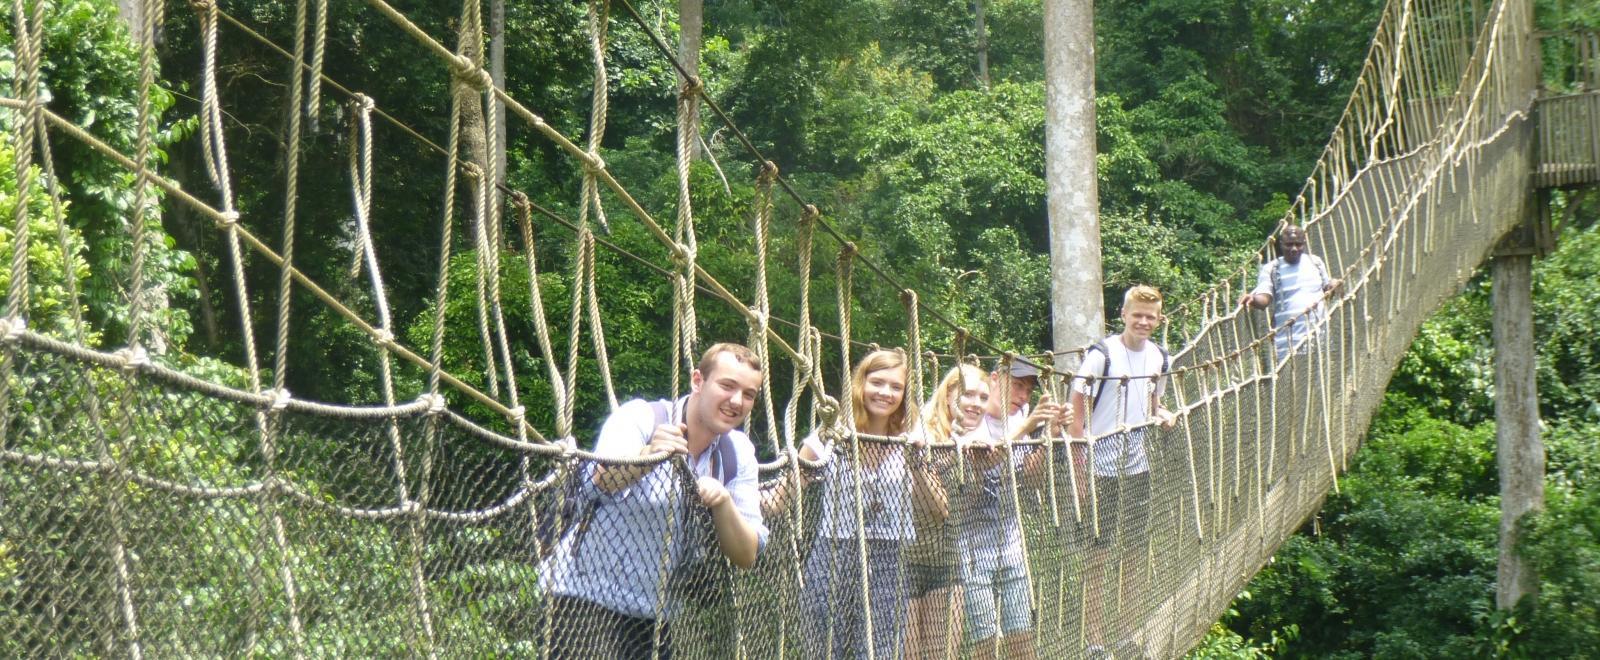 Projects Abroad volunteers enjoy a fun canopy walk in a forest in ghana.